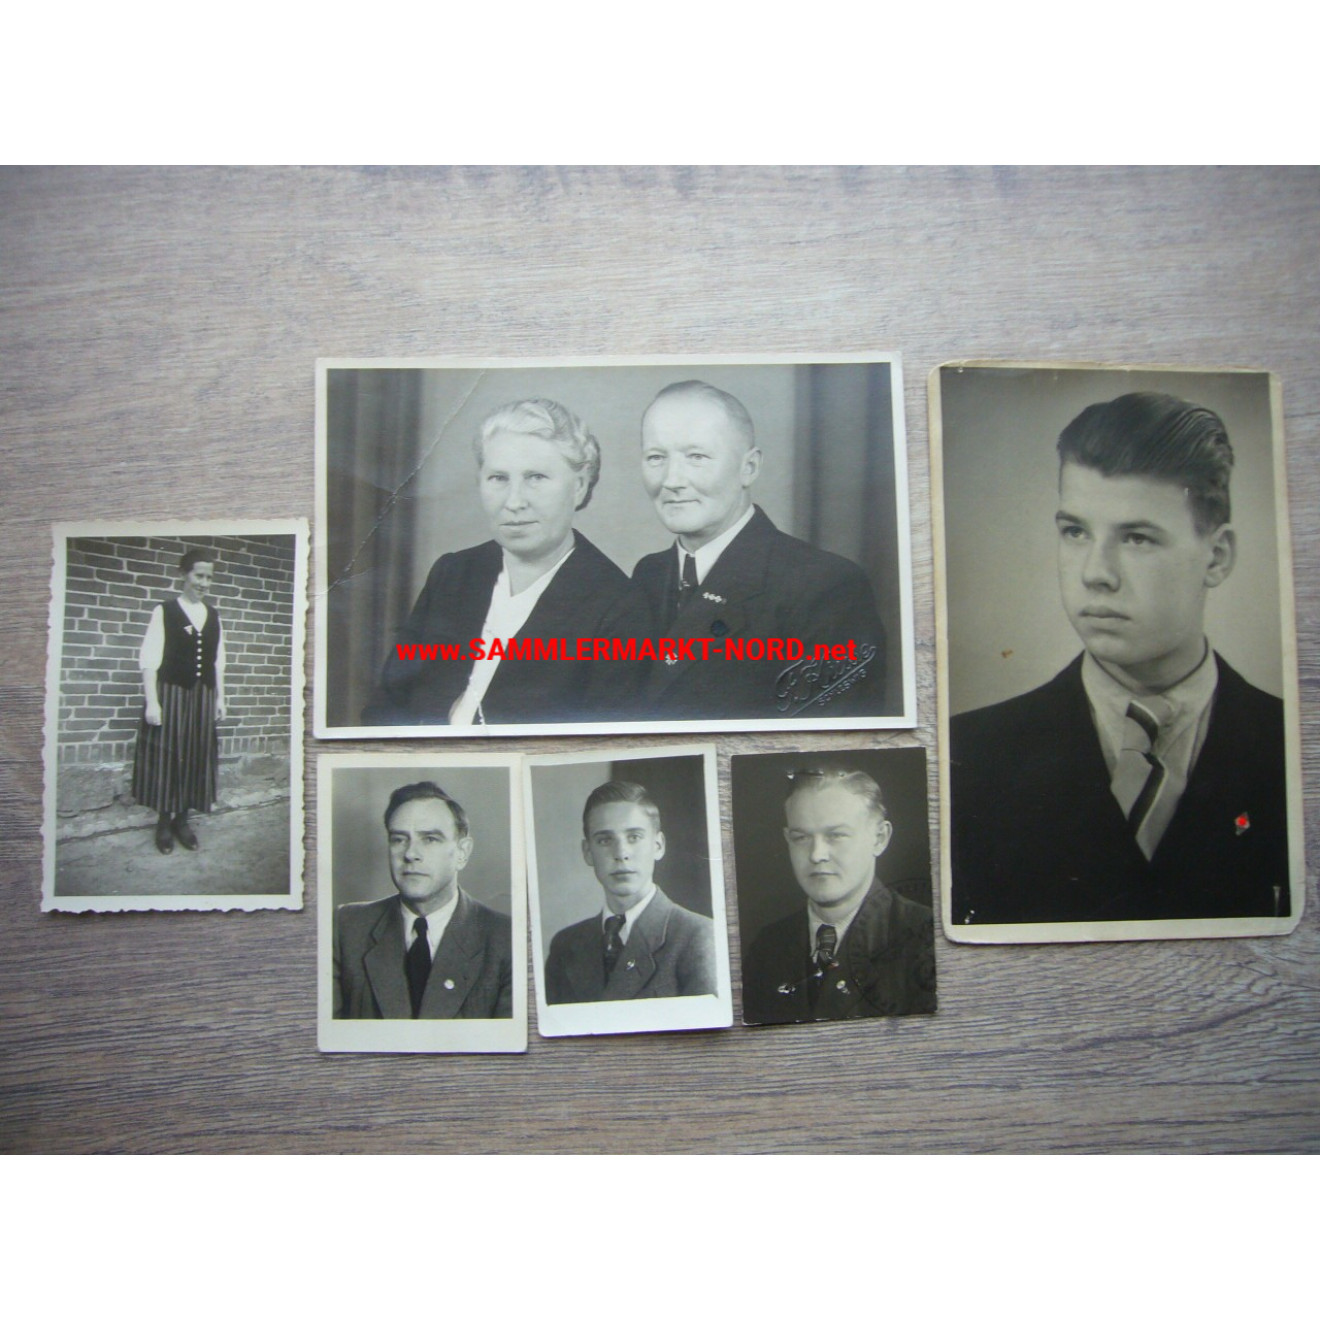 6 x portrait photo of persons with various membership badges (HJ, ...)